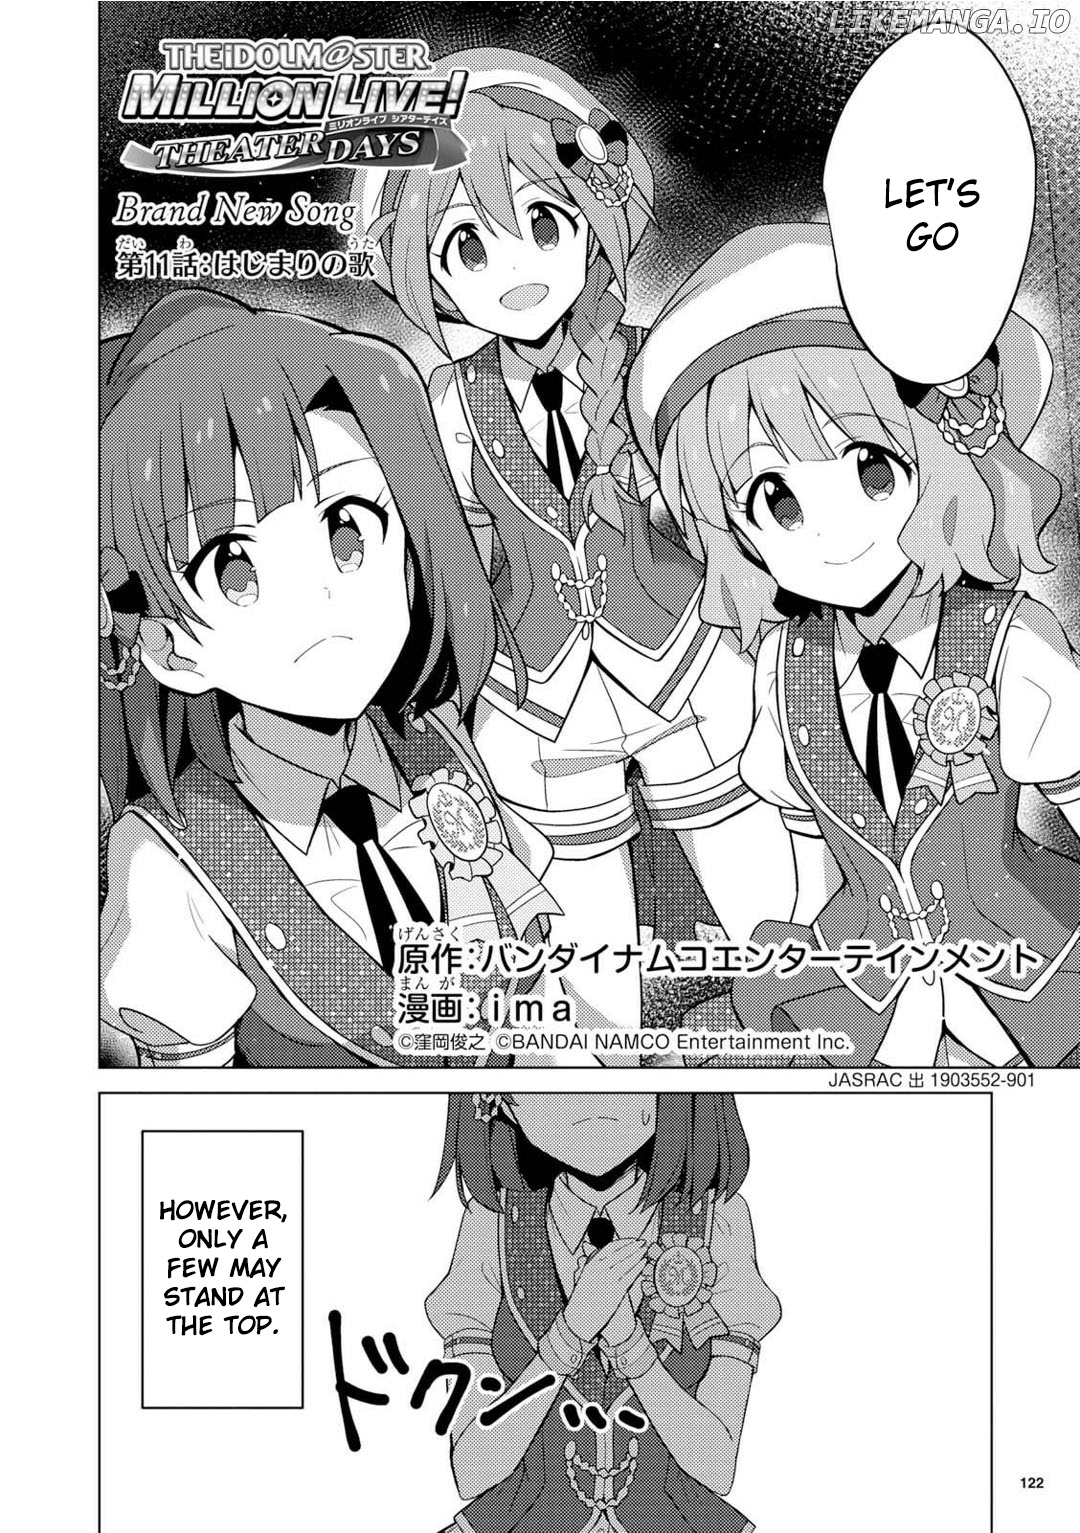 THE iDOLM@STER Million Live! Theater Days - Brand New Song chapter 11 - page 2